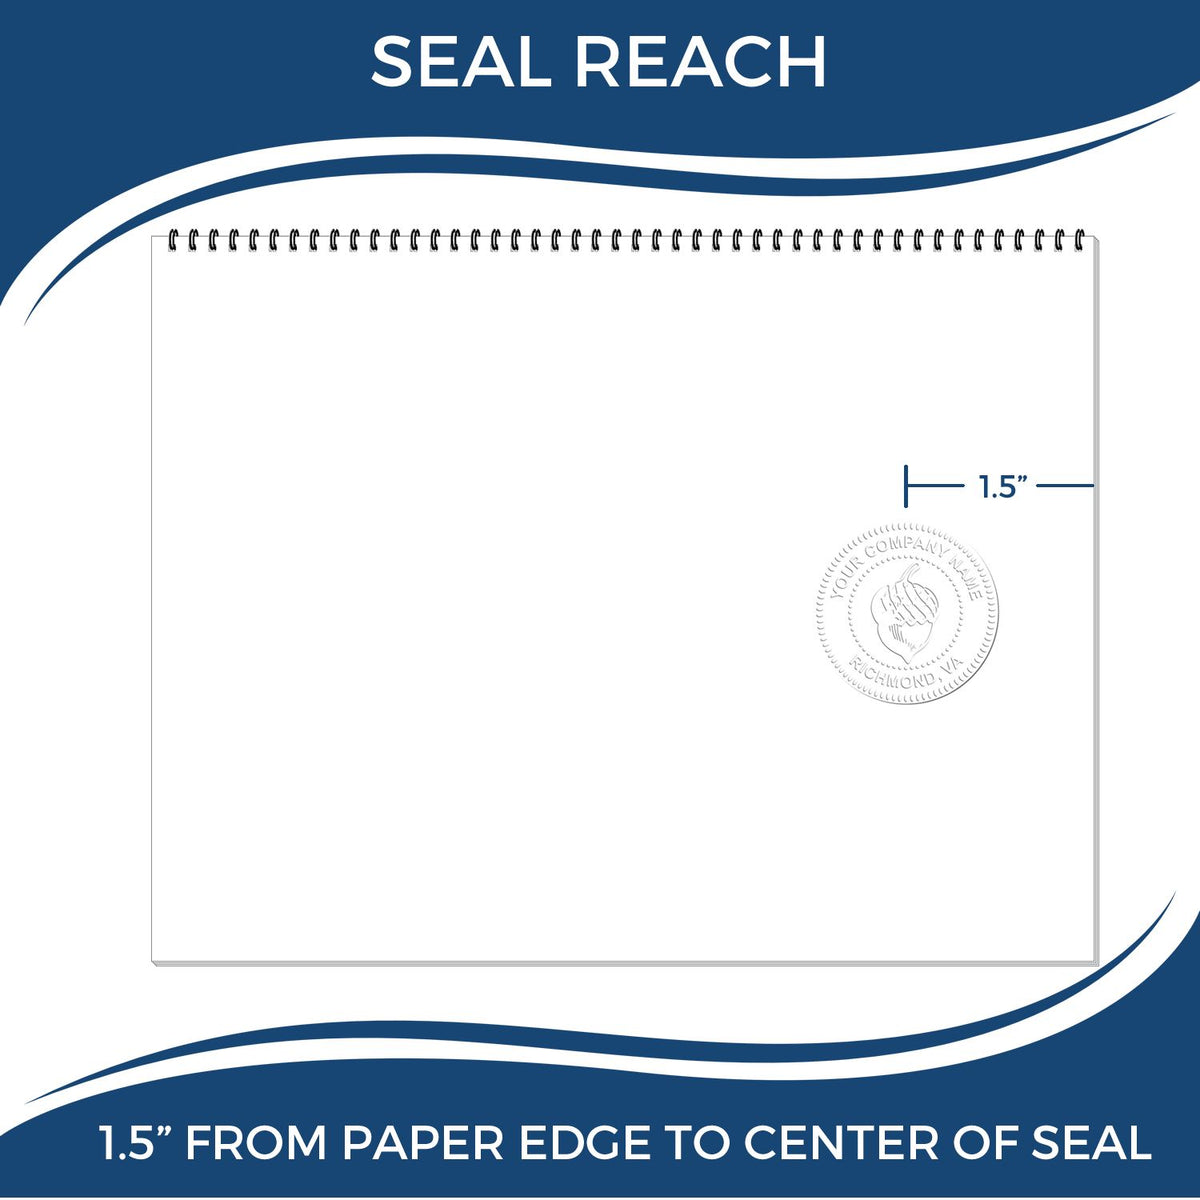 An infographic showing the seal reach which is represented by a ruler and a miniature seal image of the Mississippi Engineer Desk Seal